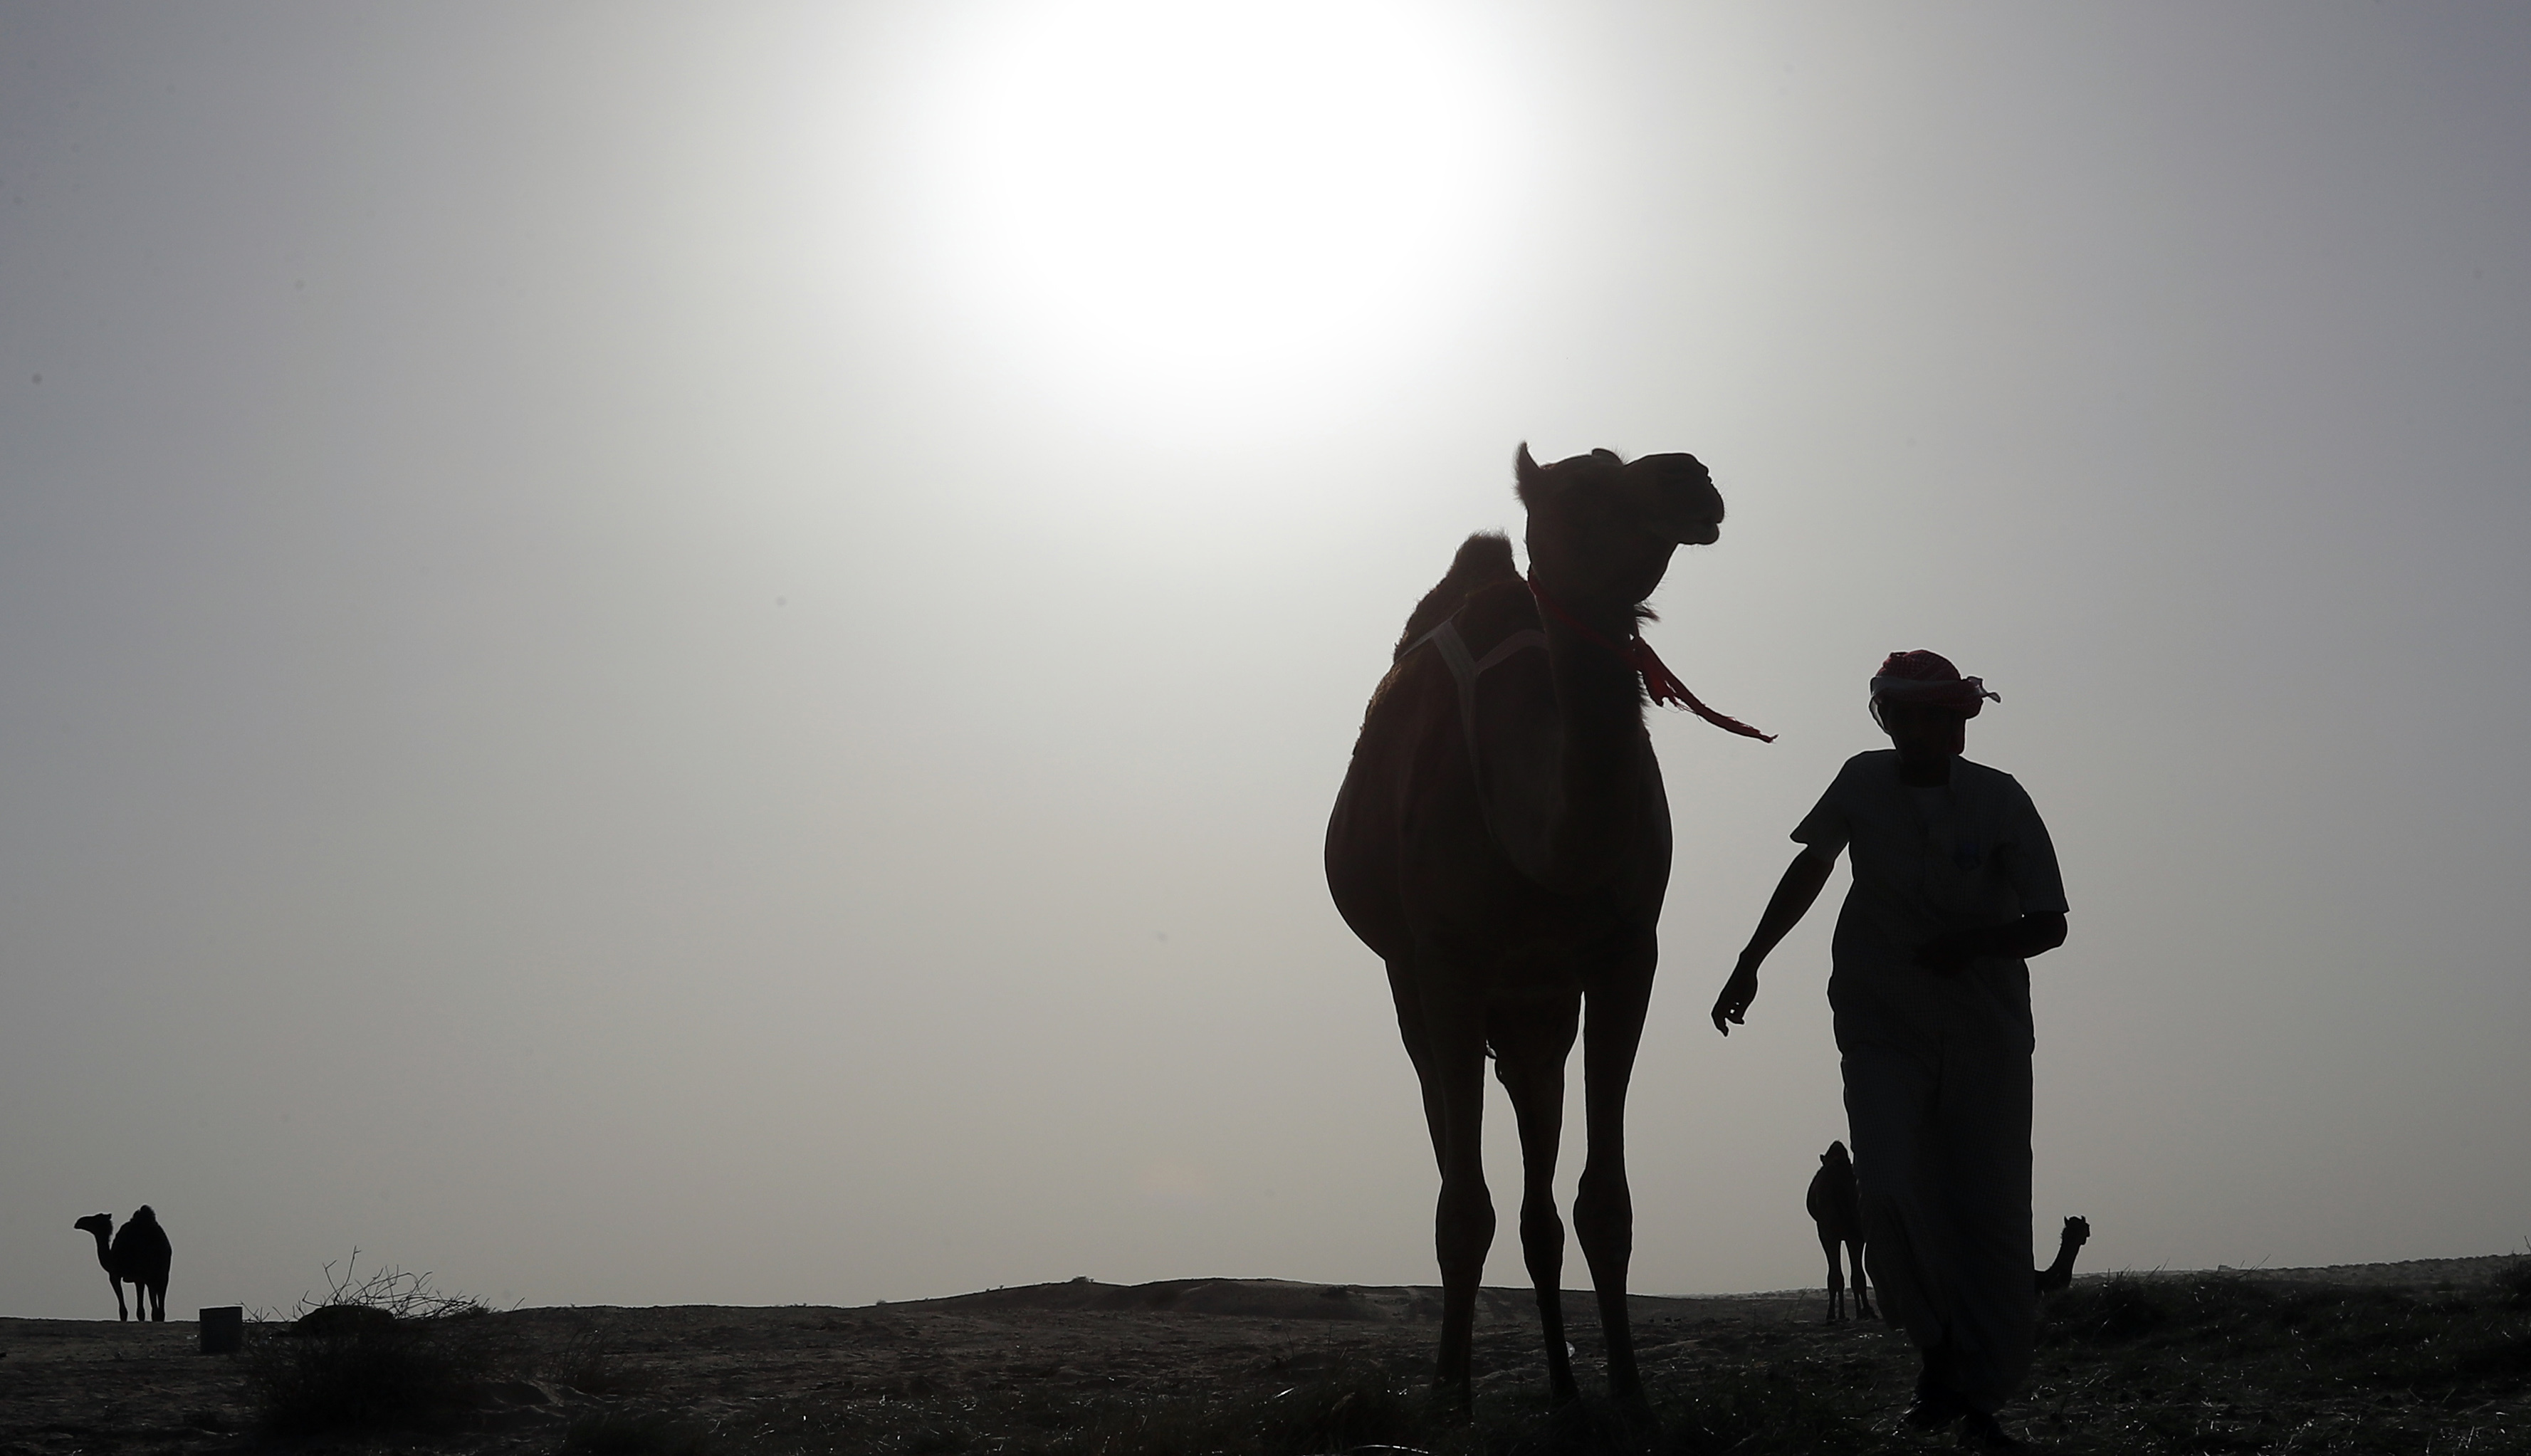 TOPSHOT - Qatari men herd camels in a desert area on the Qatari side of the Abu Samrah border crossing between Saudi Arabia and Qatar on June 21, 2017. Around 12,000 camels and sheep have become the latest victims of the Gulf diplomatic crisis, being forced to trek back to Qatar from Saudi Arabia, a newspaper reported Tuesday. / AFP PHOTO / KARIM JAAFAR / TT / kod 444